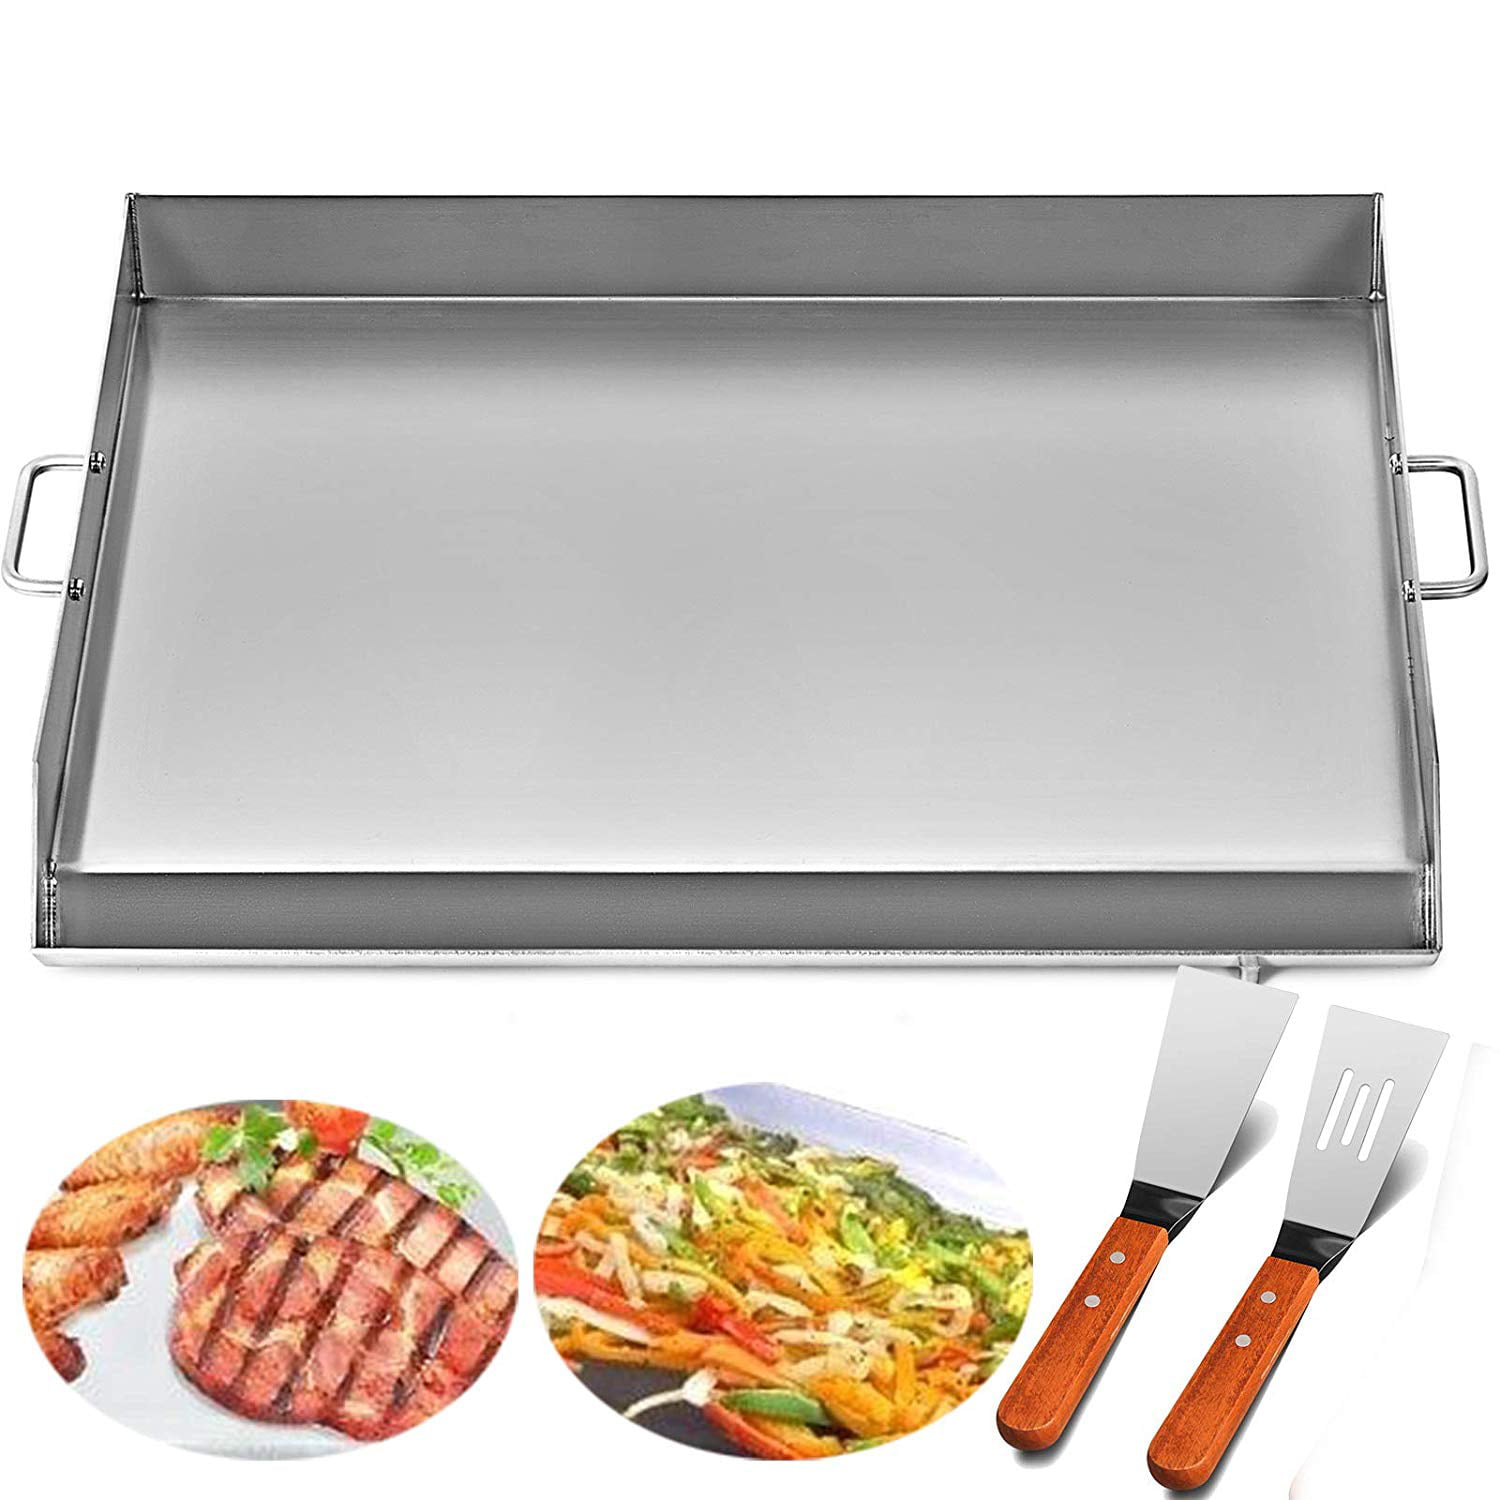 VEVOR 32"x17" Universal Flat Top Griddle Stainless Steel Comal BBQ Flat Top Griddle Stainless Steel